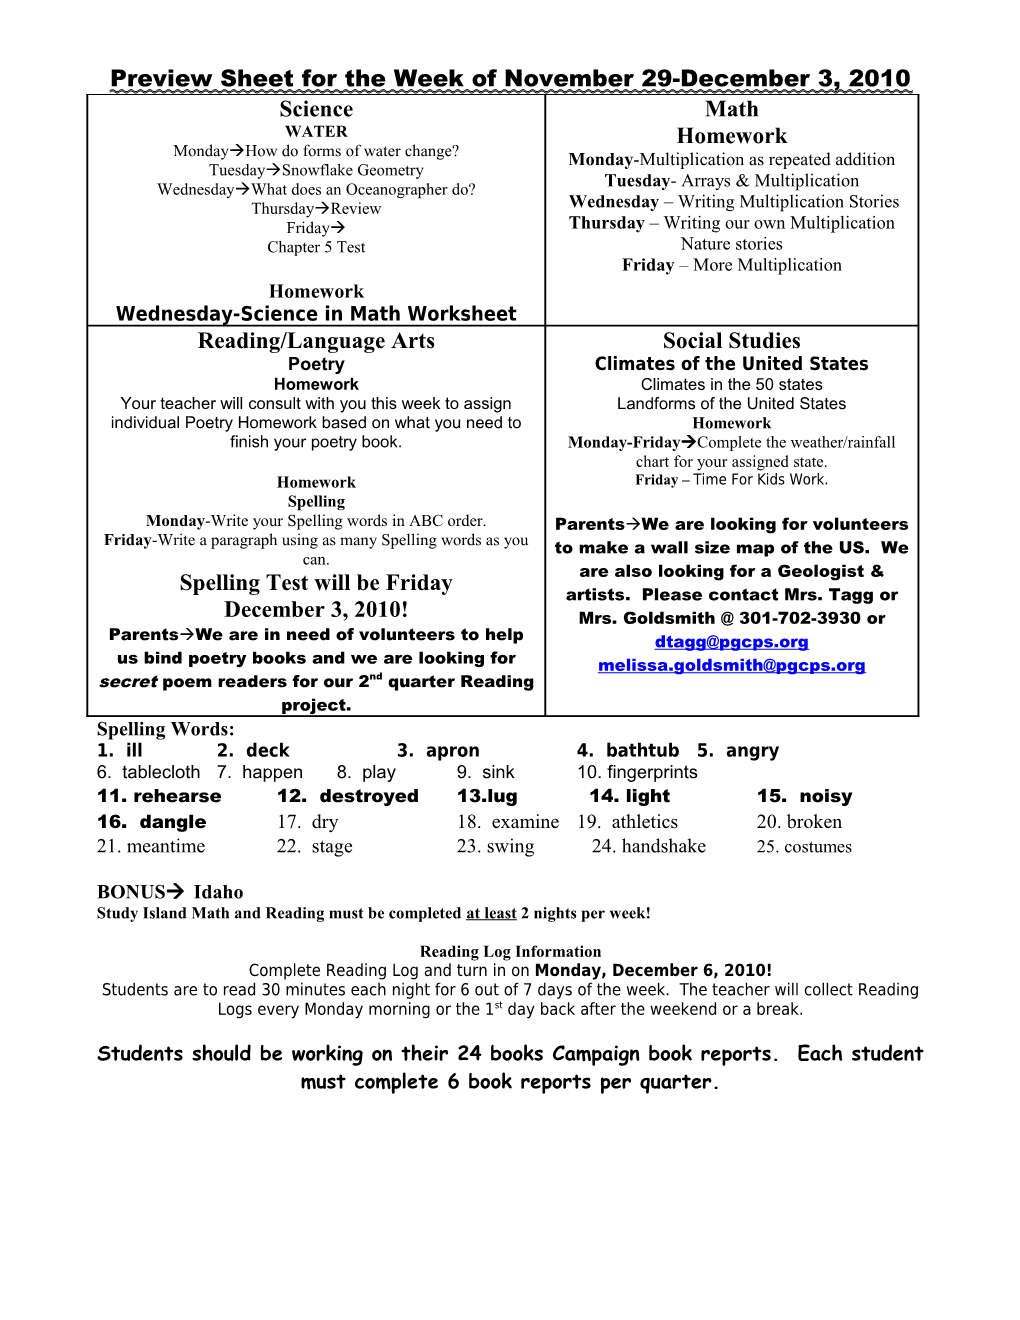 Preview Sheet for the Week of November 29-December 3, 2010